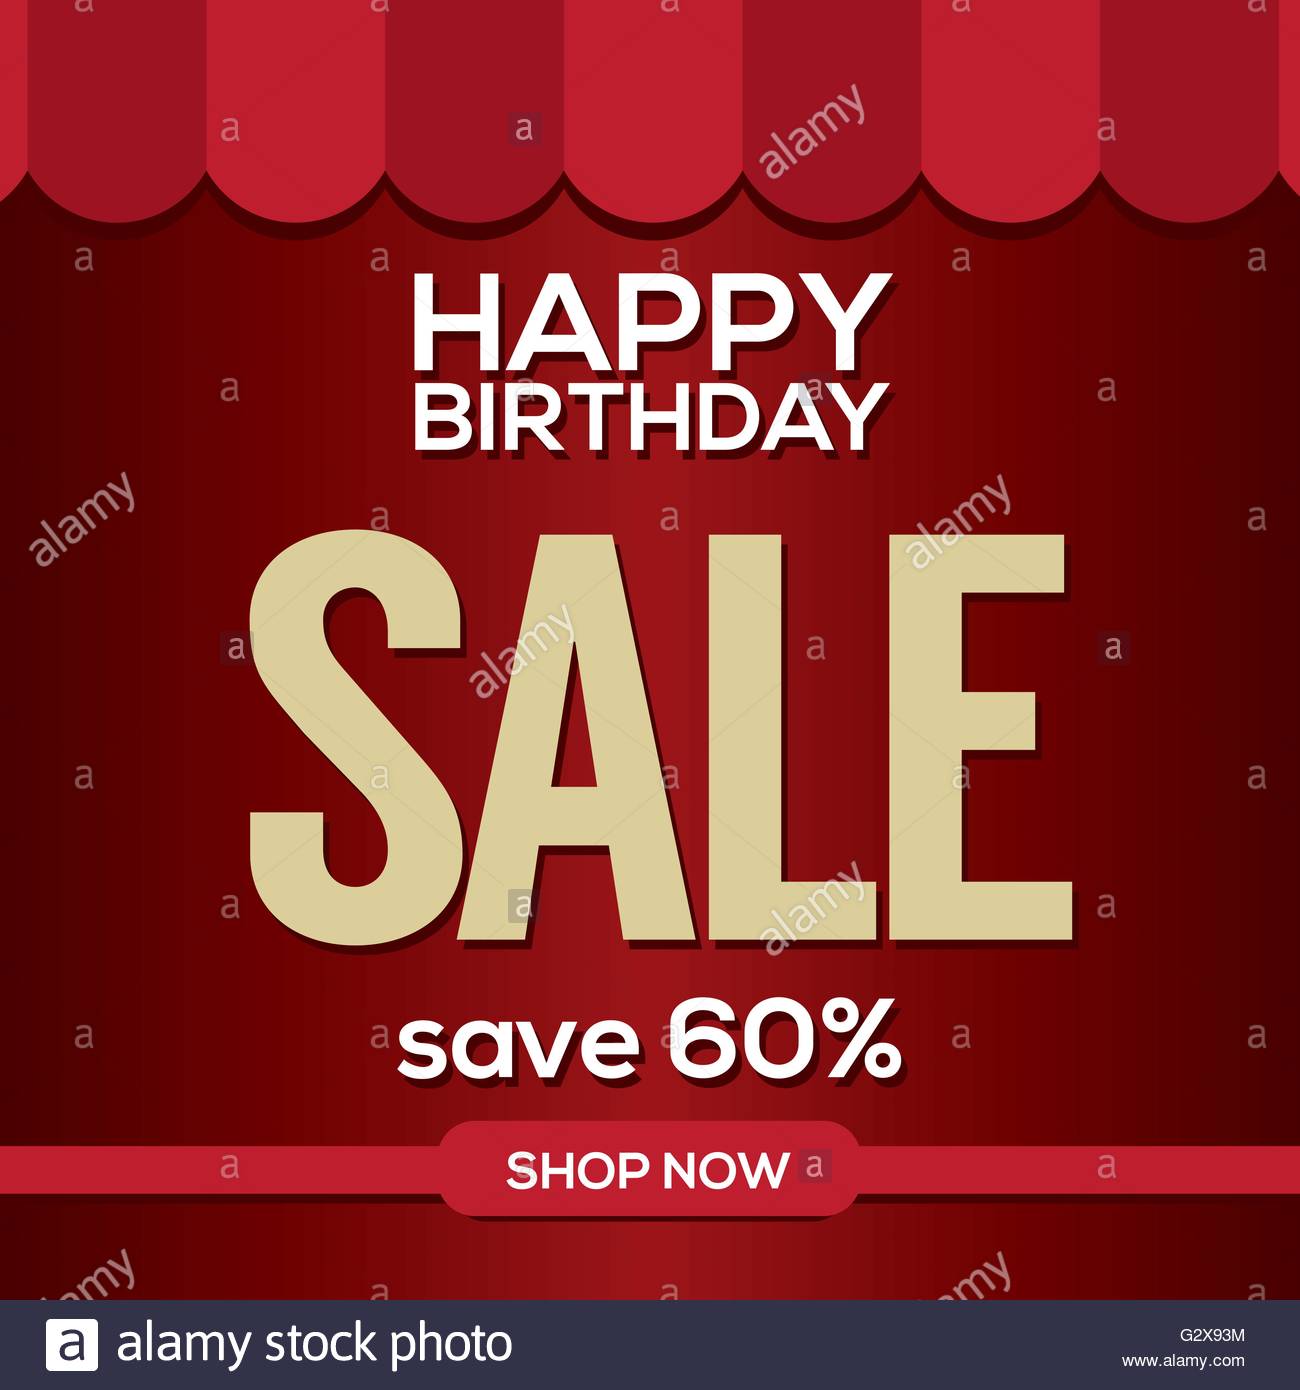 Birthday Promo Offer! 50% Discount Off Our Products and Services. 